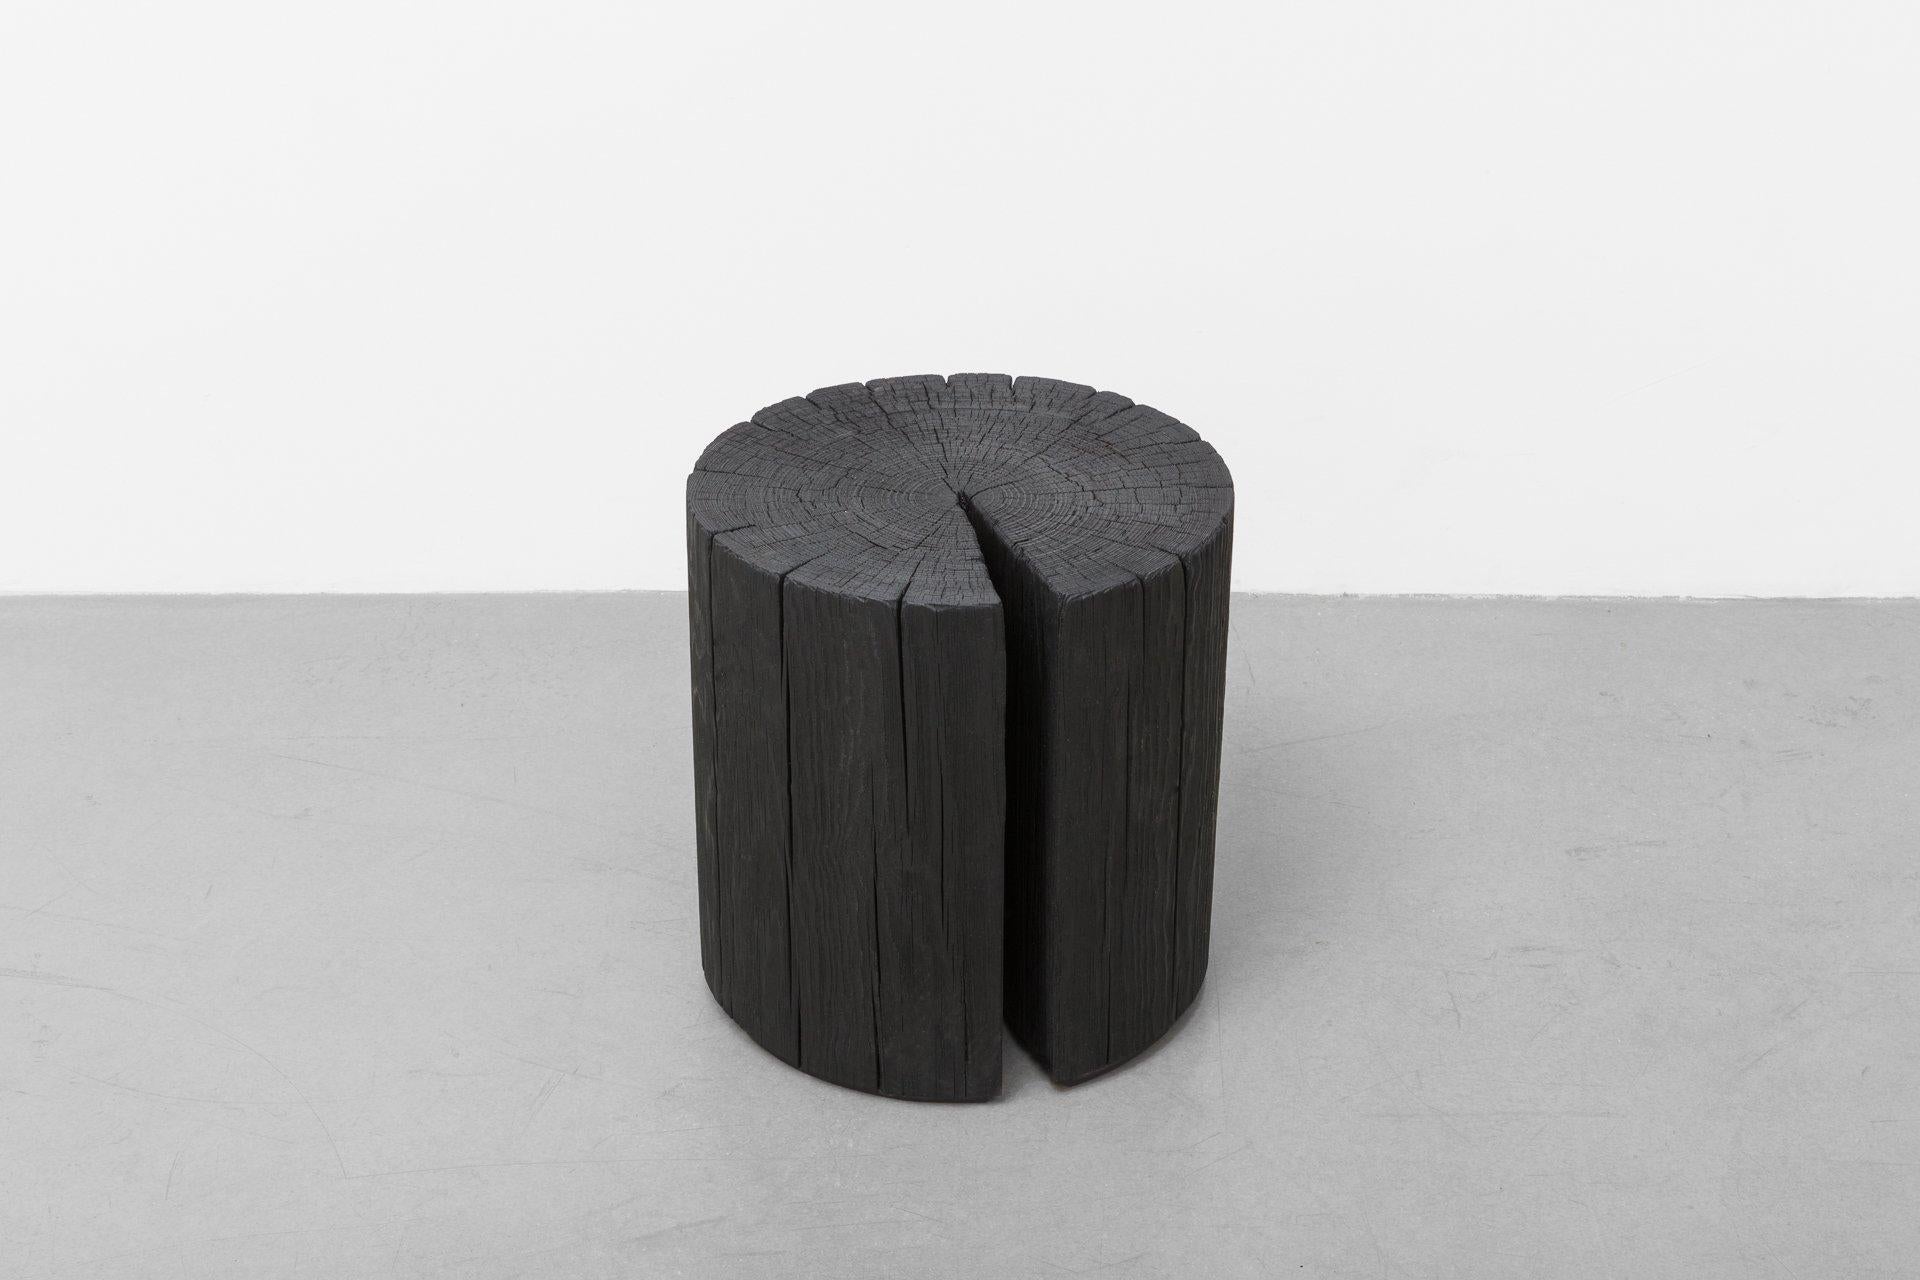 The Hono stool started with our rediscovery of Shou Sugi Ban, an ancient Japanese burning technique that preserves wood through charring. Inspired by the method's resulting rich color depth, authentic texture, and it's traditional use to